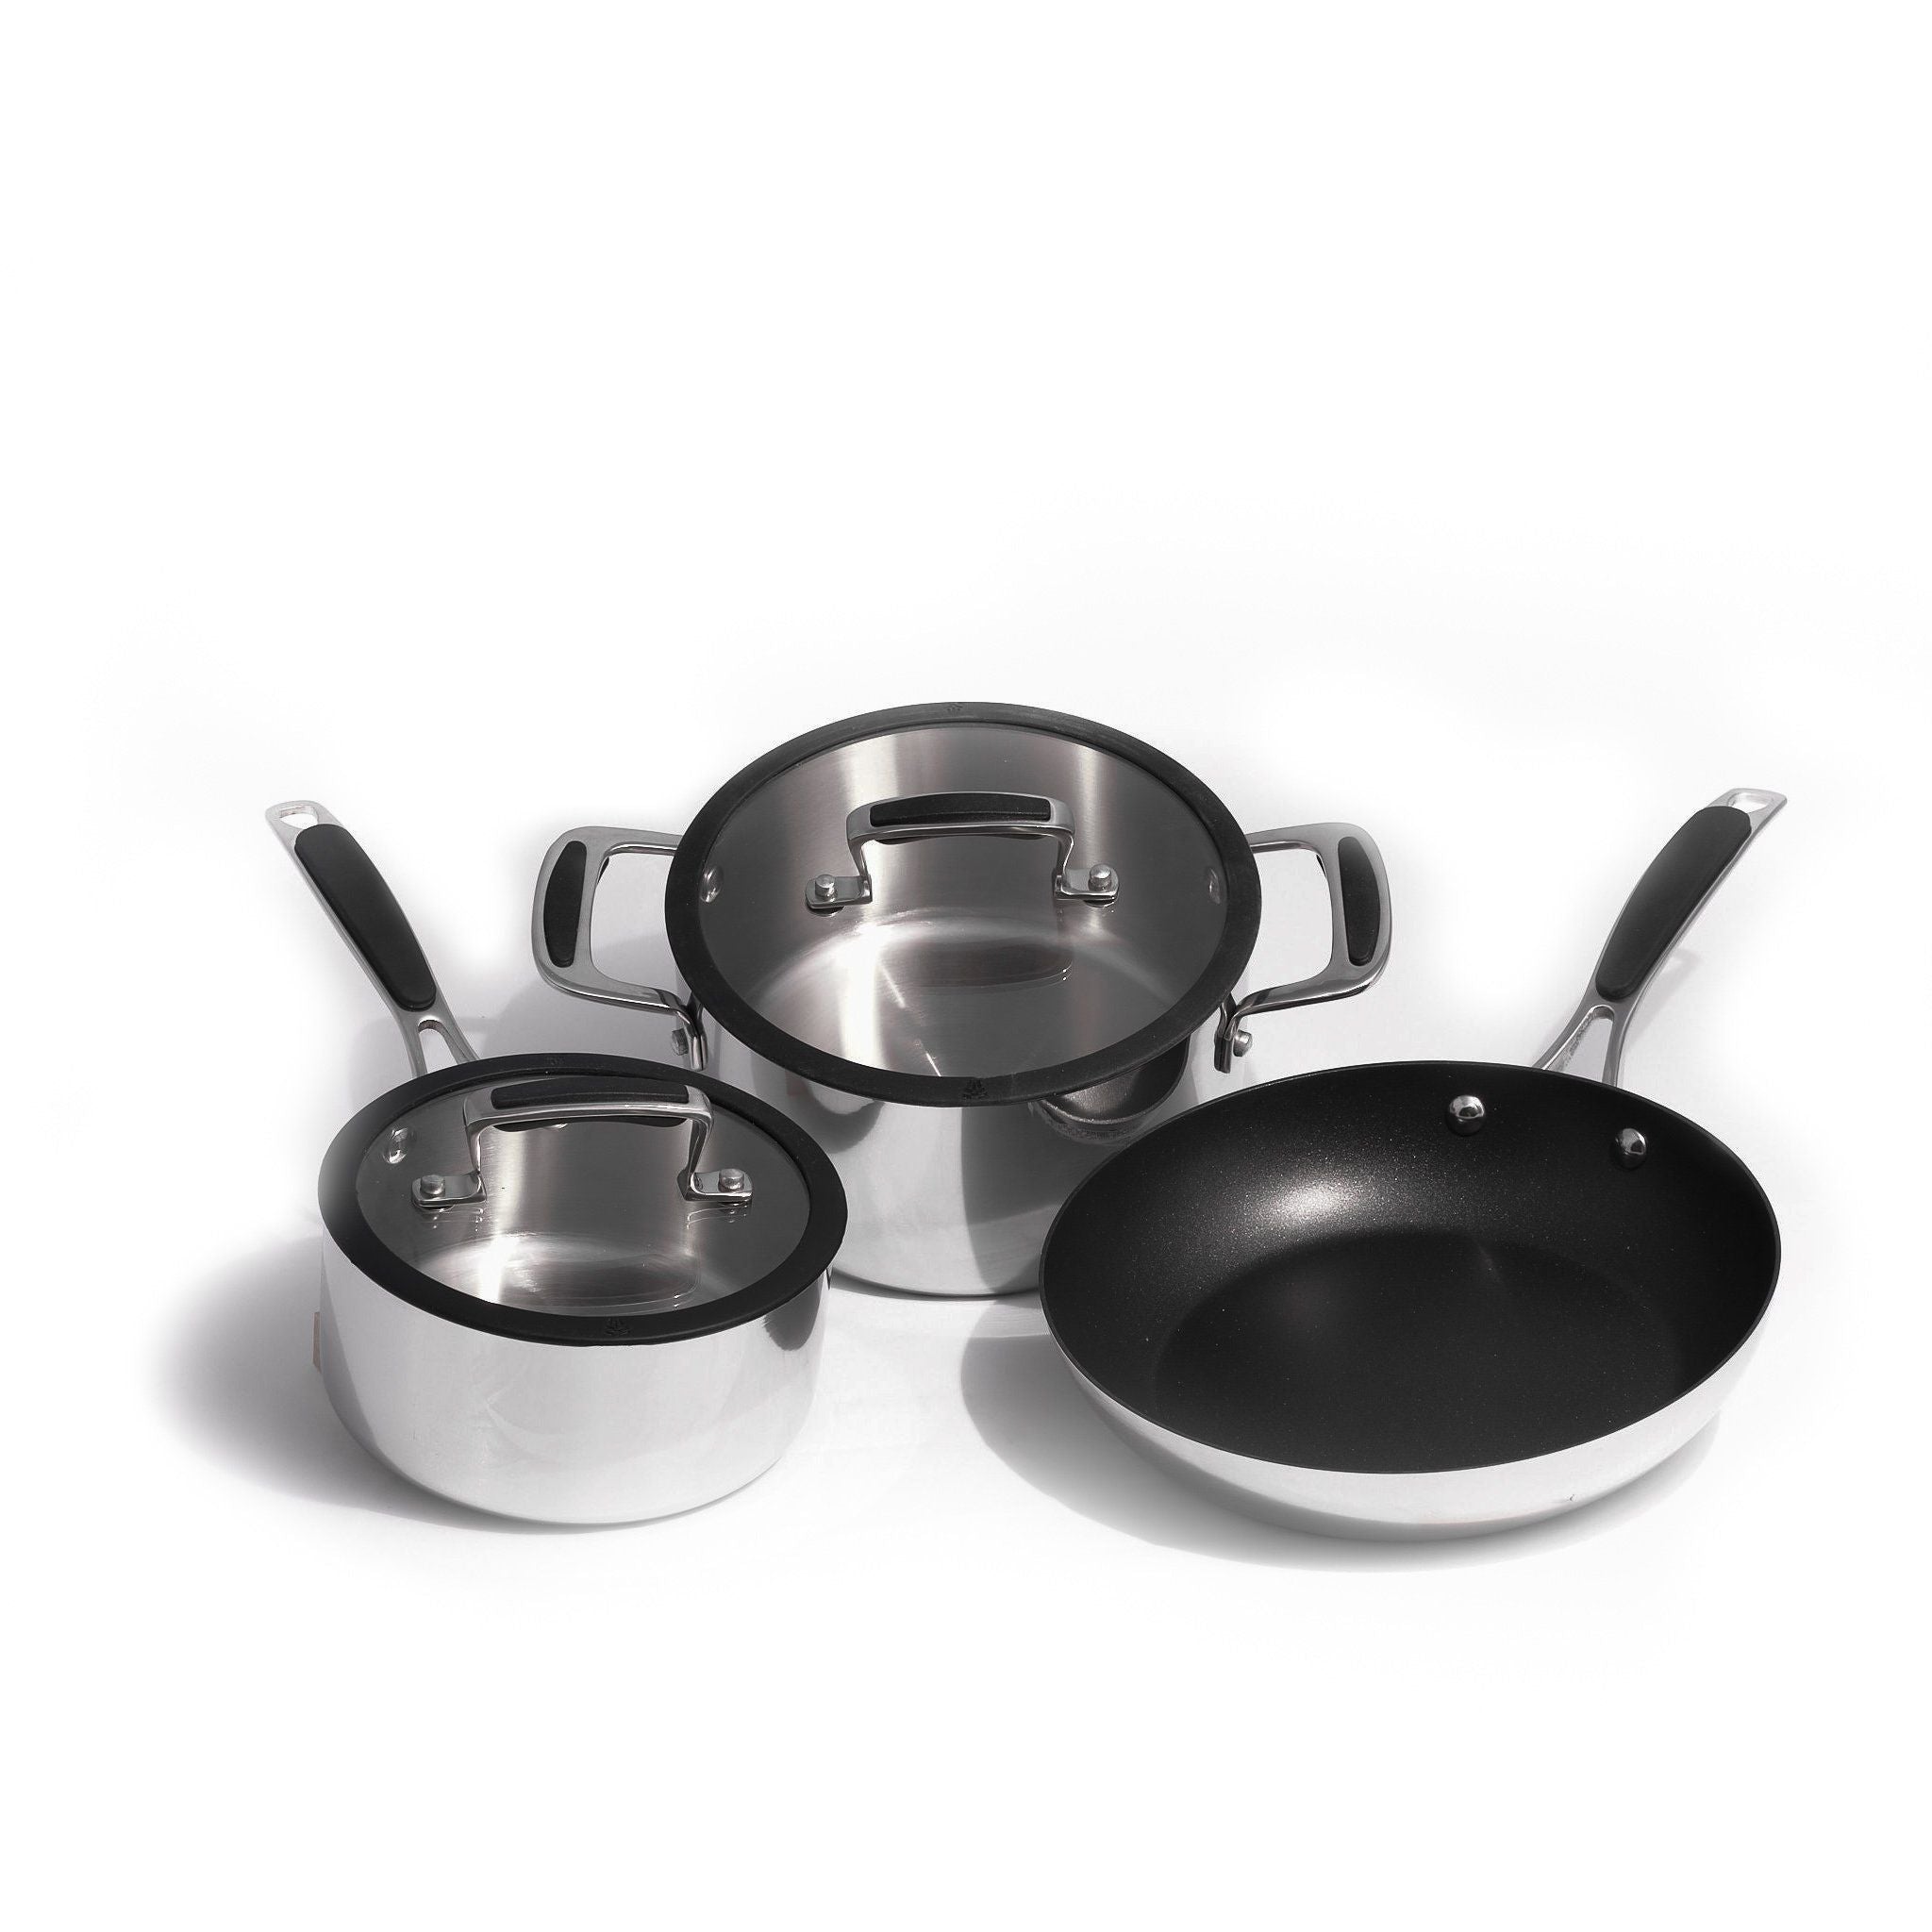 Deep stock pot Ø 36cm with lid - induction stainless steel 18/10 - Chef  Classic - Lacor